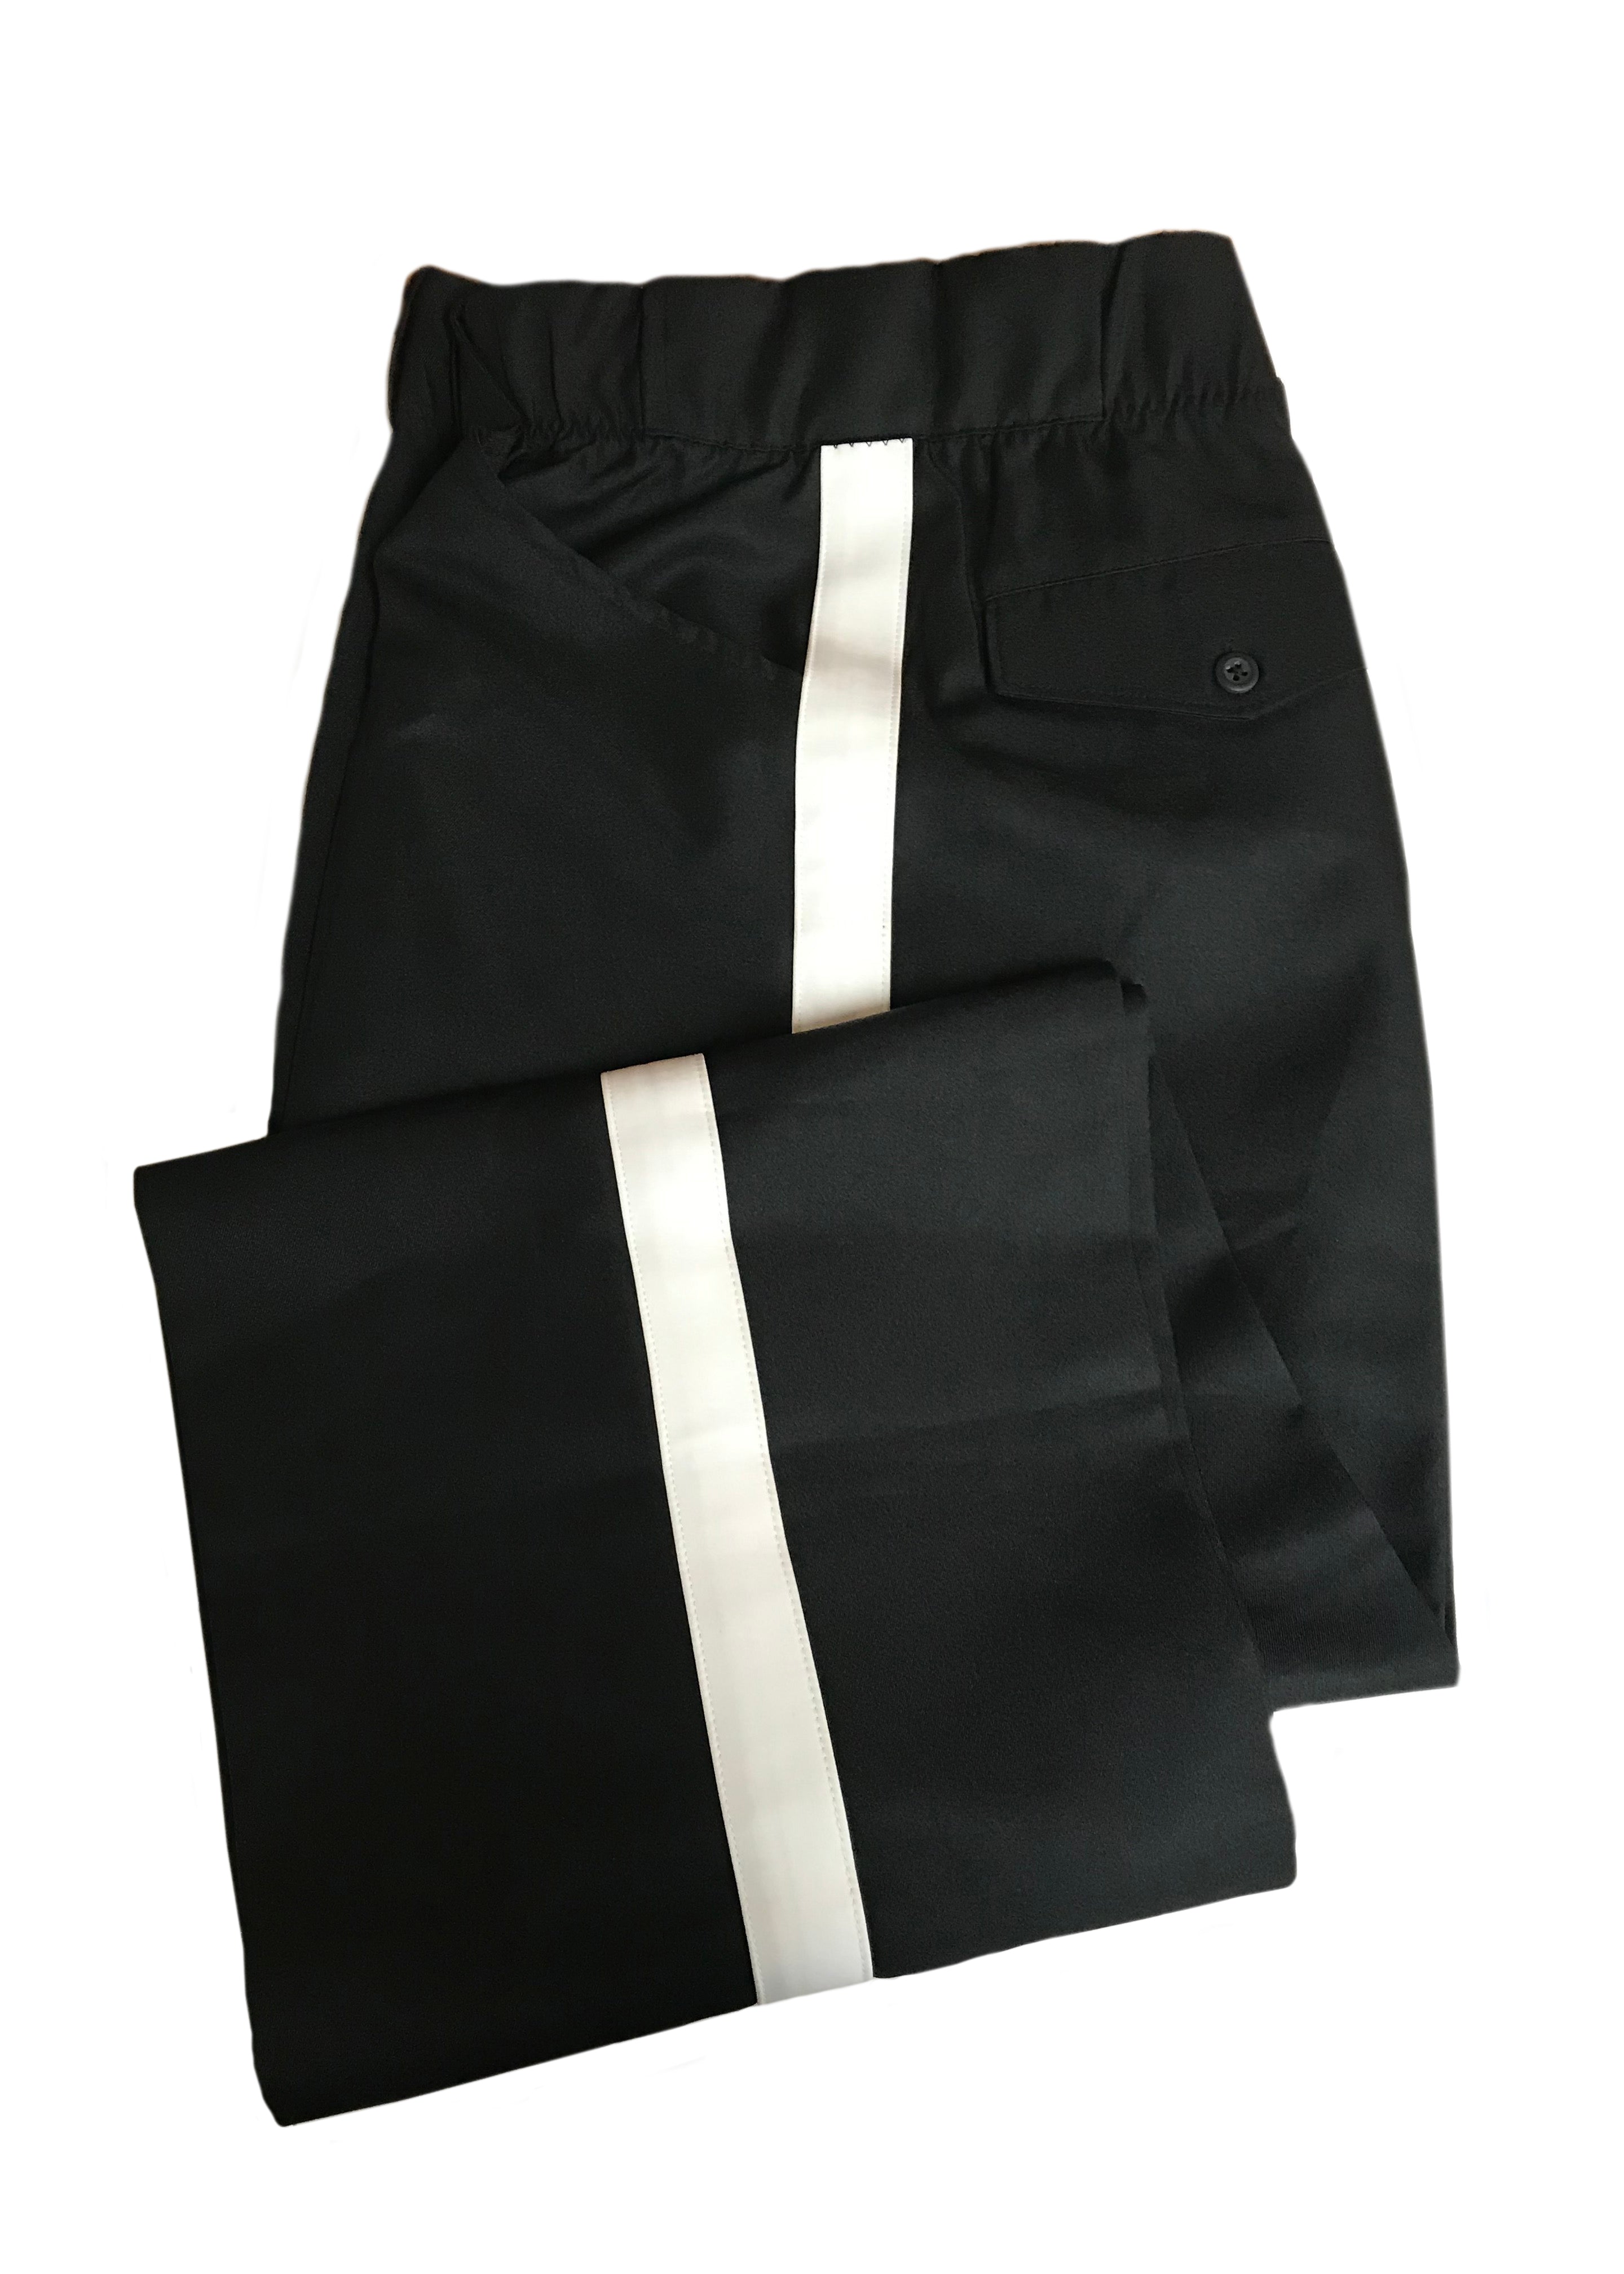 D9860 - Dalco's BEST Football Officials Pants with Athletic Elite Micro  Woven Fabric